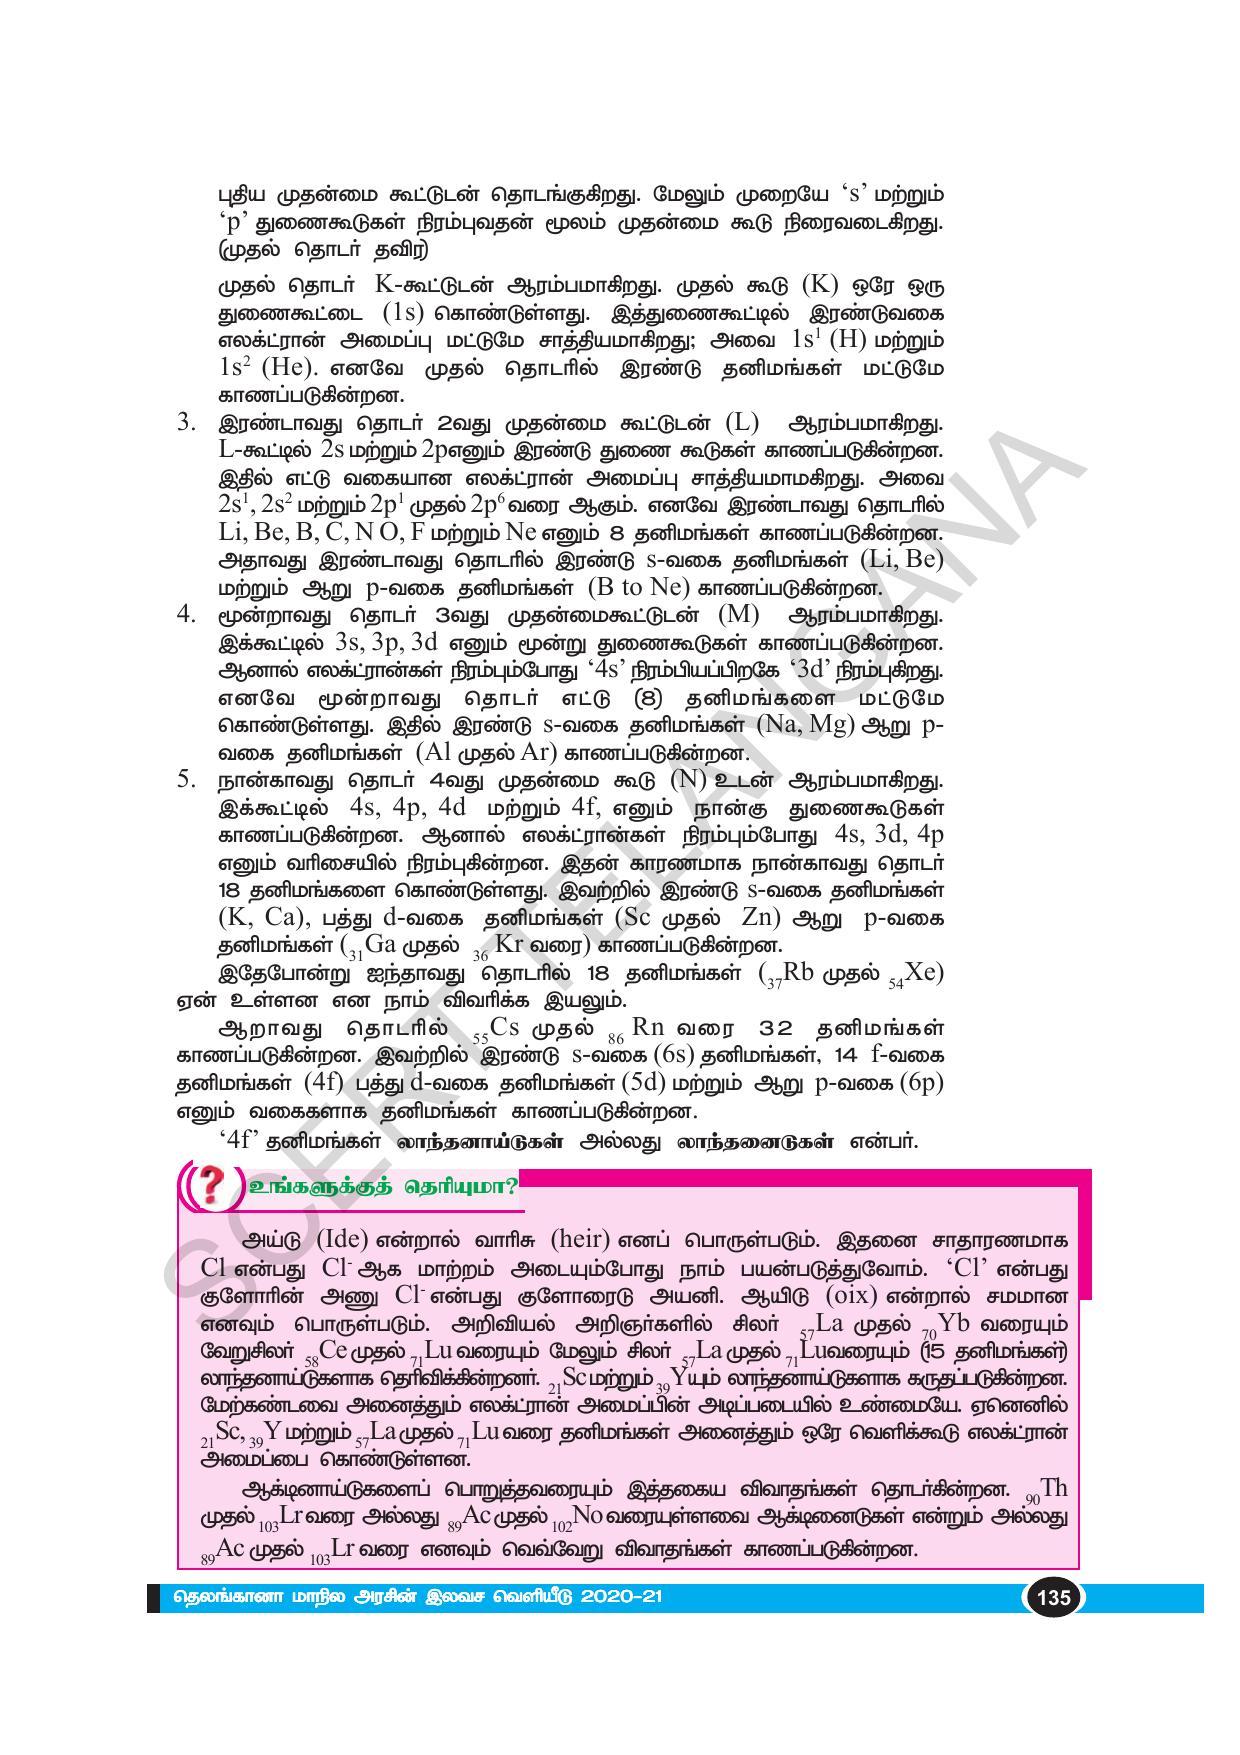 TS SCERT Class 10 Physical Science(Tamil Medium) Text Book - Page 147